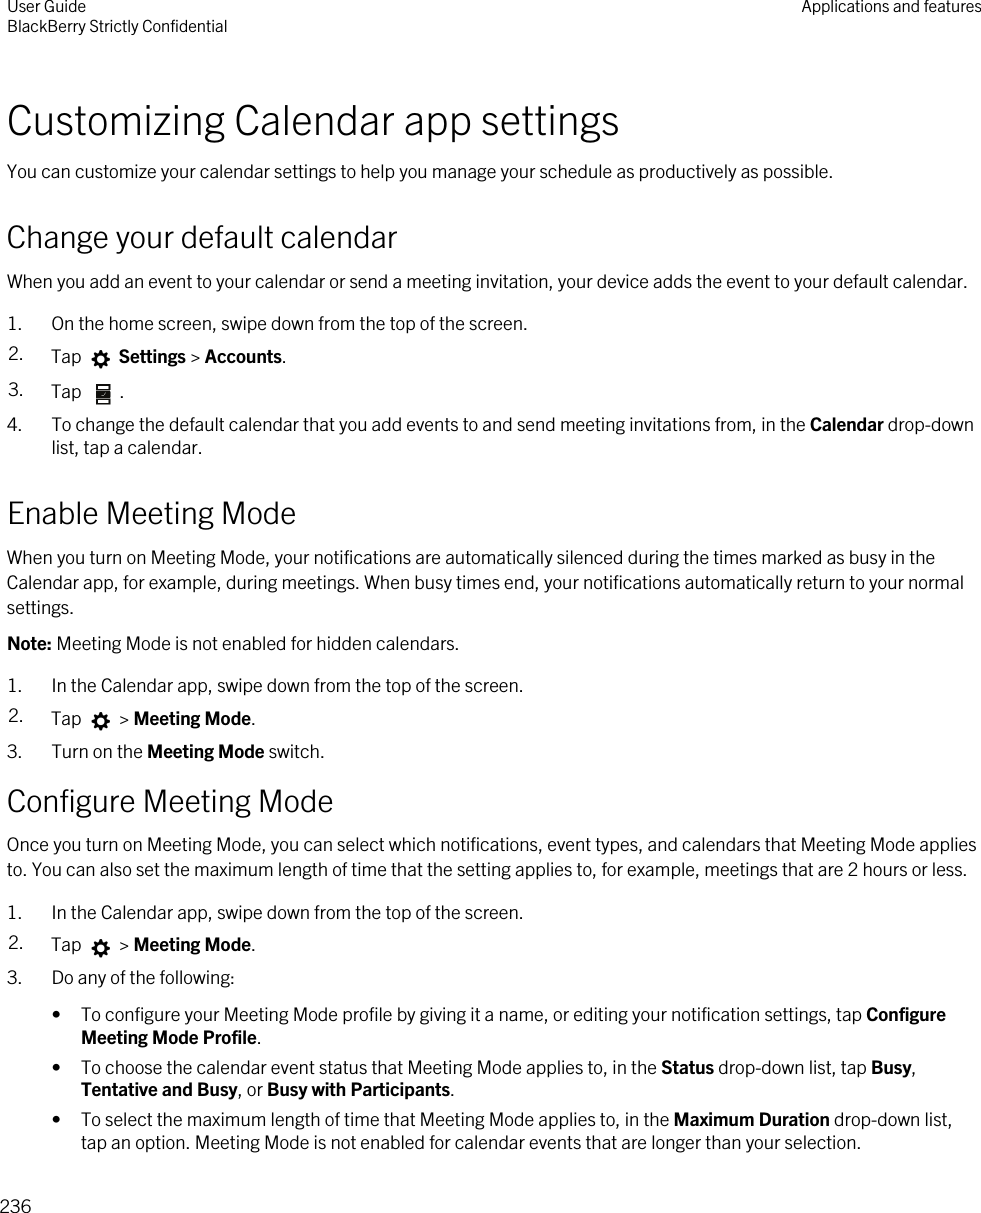 Customizing Calendar app settingsYou can customize your calendar settings to help you manage your schedule as productively as possible.Change your default calendarWhen you add an event to your calendar or send a meeting invitation, your device adds the event to your default calendar.1. On the home screen, swipe down from the top of the screen.2. Tap   Settings &gt; Accounts.3. Tap  .4. To change the default calendar that you add events to and send meeting invitations from, in the Calendar drop-down list, tap a calendar.Enable Meeting ModeWhen you turn on Meeting Mode, your notifications are automatically silenced during the times marked as busy in the Calendar app, for example, during meetings. When busy times end, your notifications automatically return to your normal settings.Note: Meeting Mode is not enabled for hidden calendars.1. In the Calendar app, swipe down from the top of the screen.2. Tap   &gt; Meeting Mode.3. Turn on the Meeting Mode switch.Configure Meeting ModeOnce you turn on Meeting Mode, you can select which notifications, event types, and calendars that Meeting Mode applies to. You can also set the maximum length of time that the setting applies to, for example, meetings that are 2 hours or less.1. In the Calendar app, swipe down from the top of the screen.2. Tap   &gt; Meeting Mode.3. Do any of the following:• To configure your Meeting Mode profile by giving it a name, or editing your notification settings, tap Configure Meeting Mode Profile.• To choose the calendar event status that Meeting Mode applies to, in the Status drop-down list, tap Busy, Tentative and Busy, or Busy with Participants.• To select the maximum length of time that Meeting Mode applies to, in the Maximum Duration drop-down list, tap an option. Meeting Mode is not enabled for calendar events that are longer than your selection.User GuideBlackBerry Strictly Confidential Applications and features236